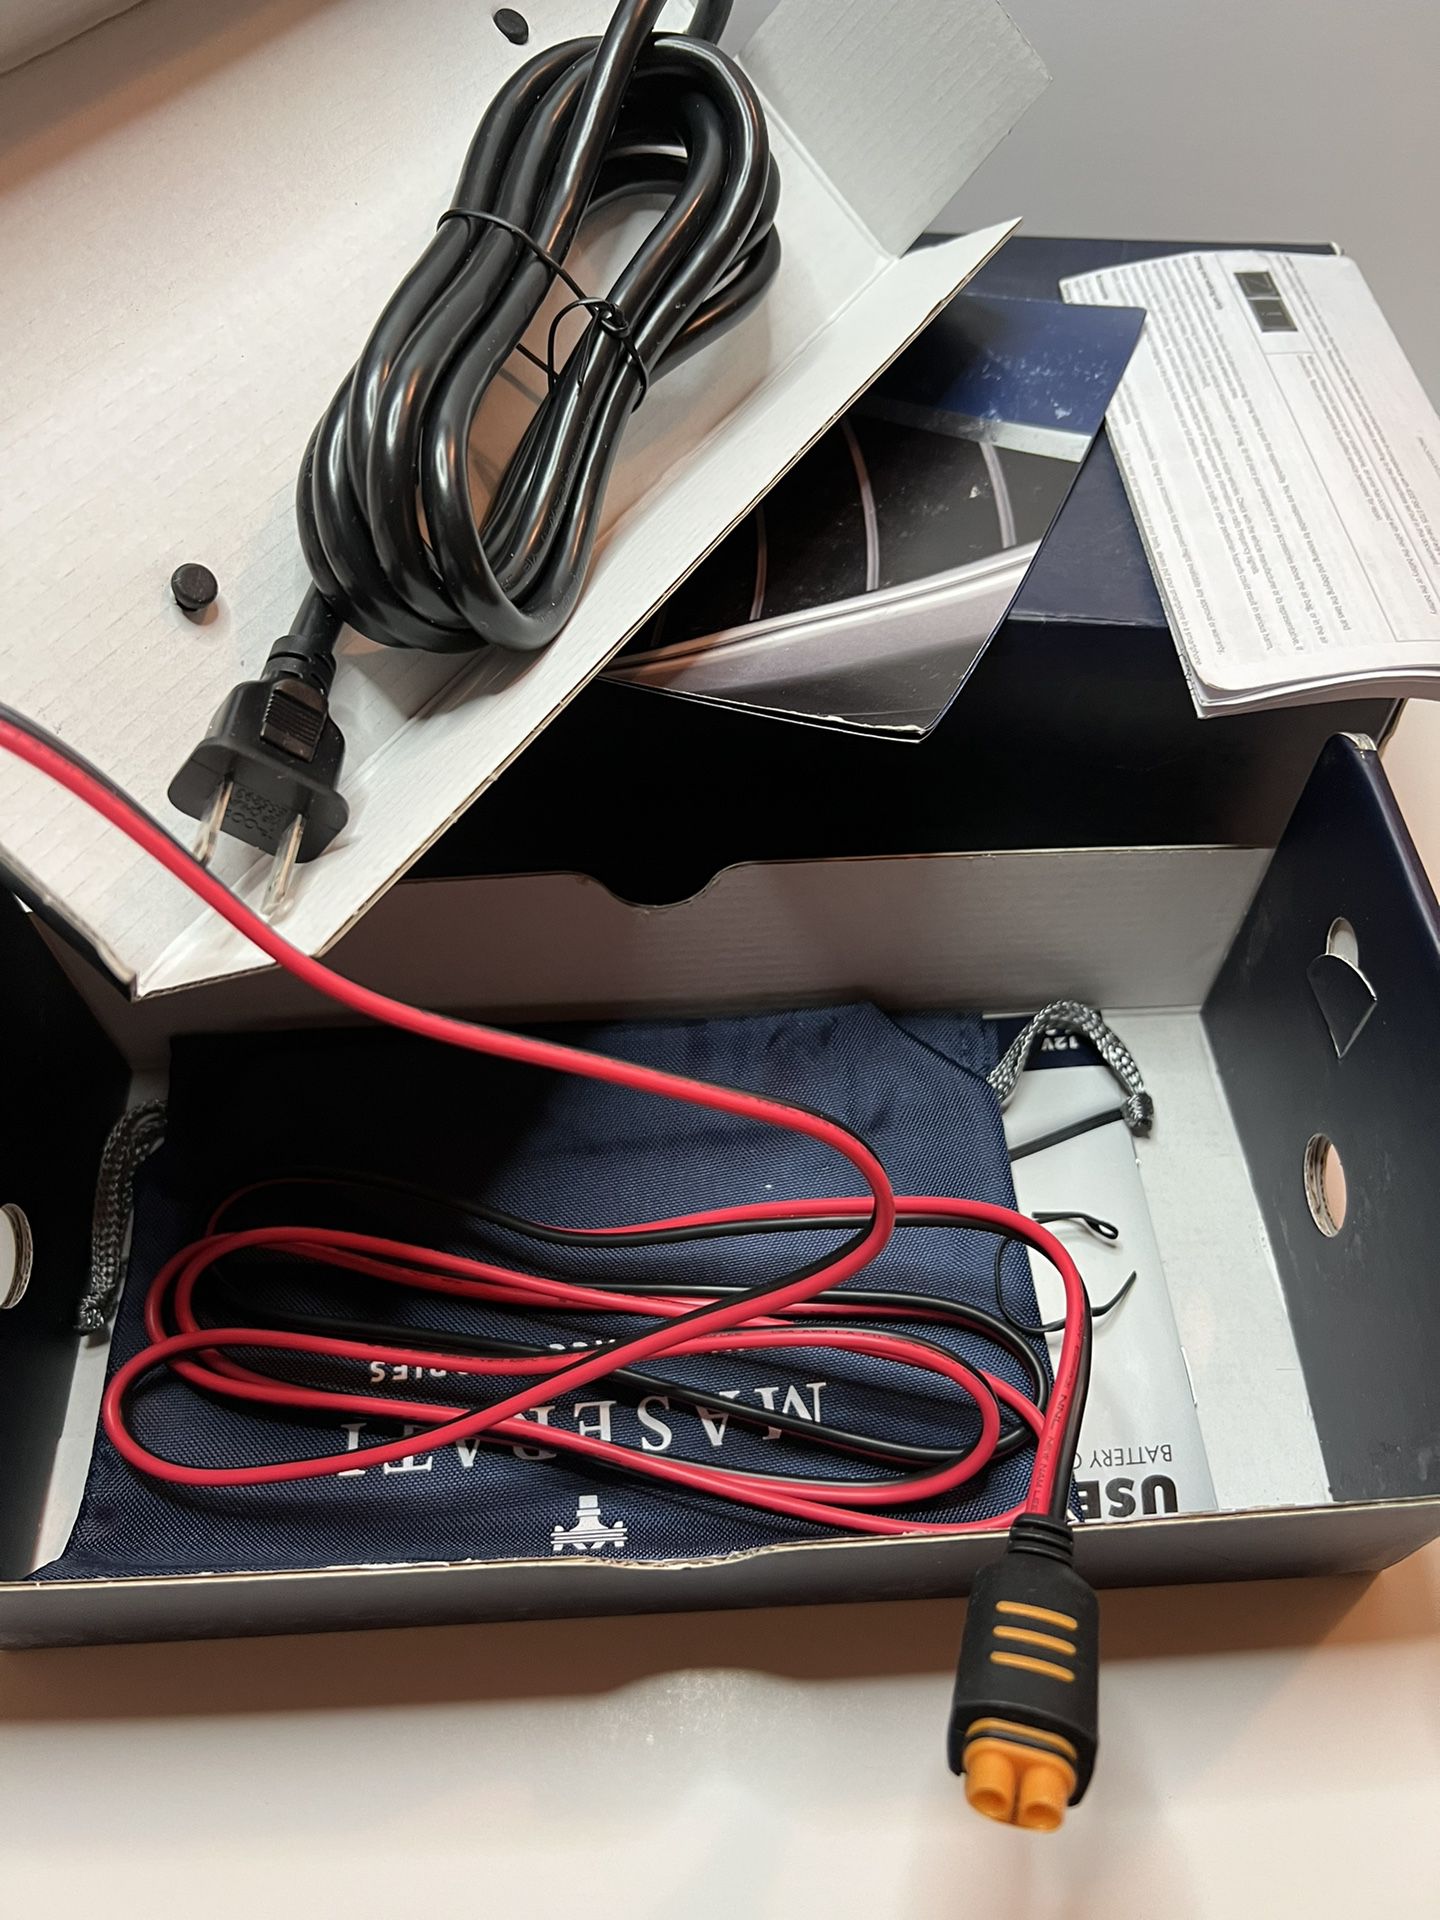 Brand New Maserati Genuine Accessories Battery Charger and Conditioner (contact info removed)75